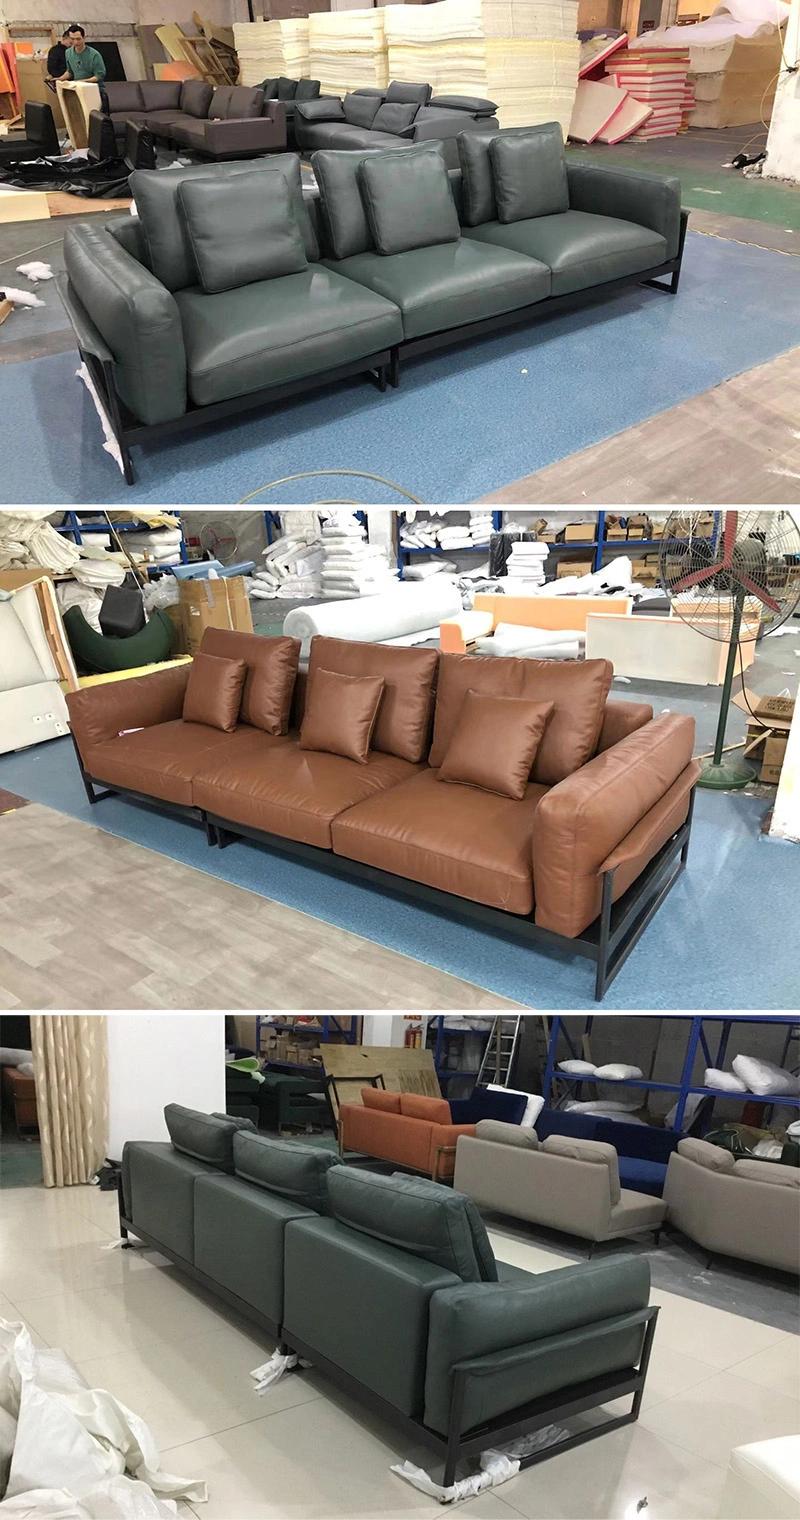 Genuine Leather Couch Modern Leisure Fabric Italian Minimalism Sofa Set for Living Room Furniture